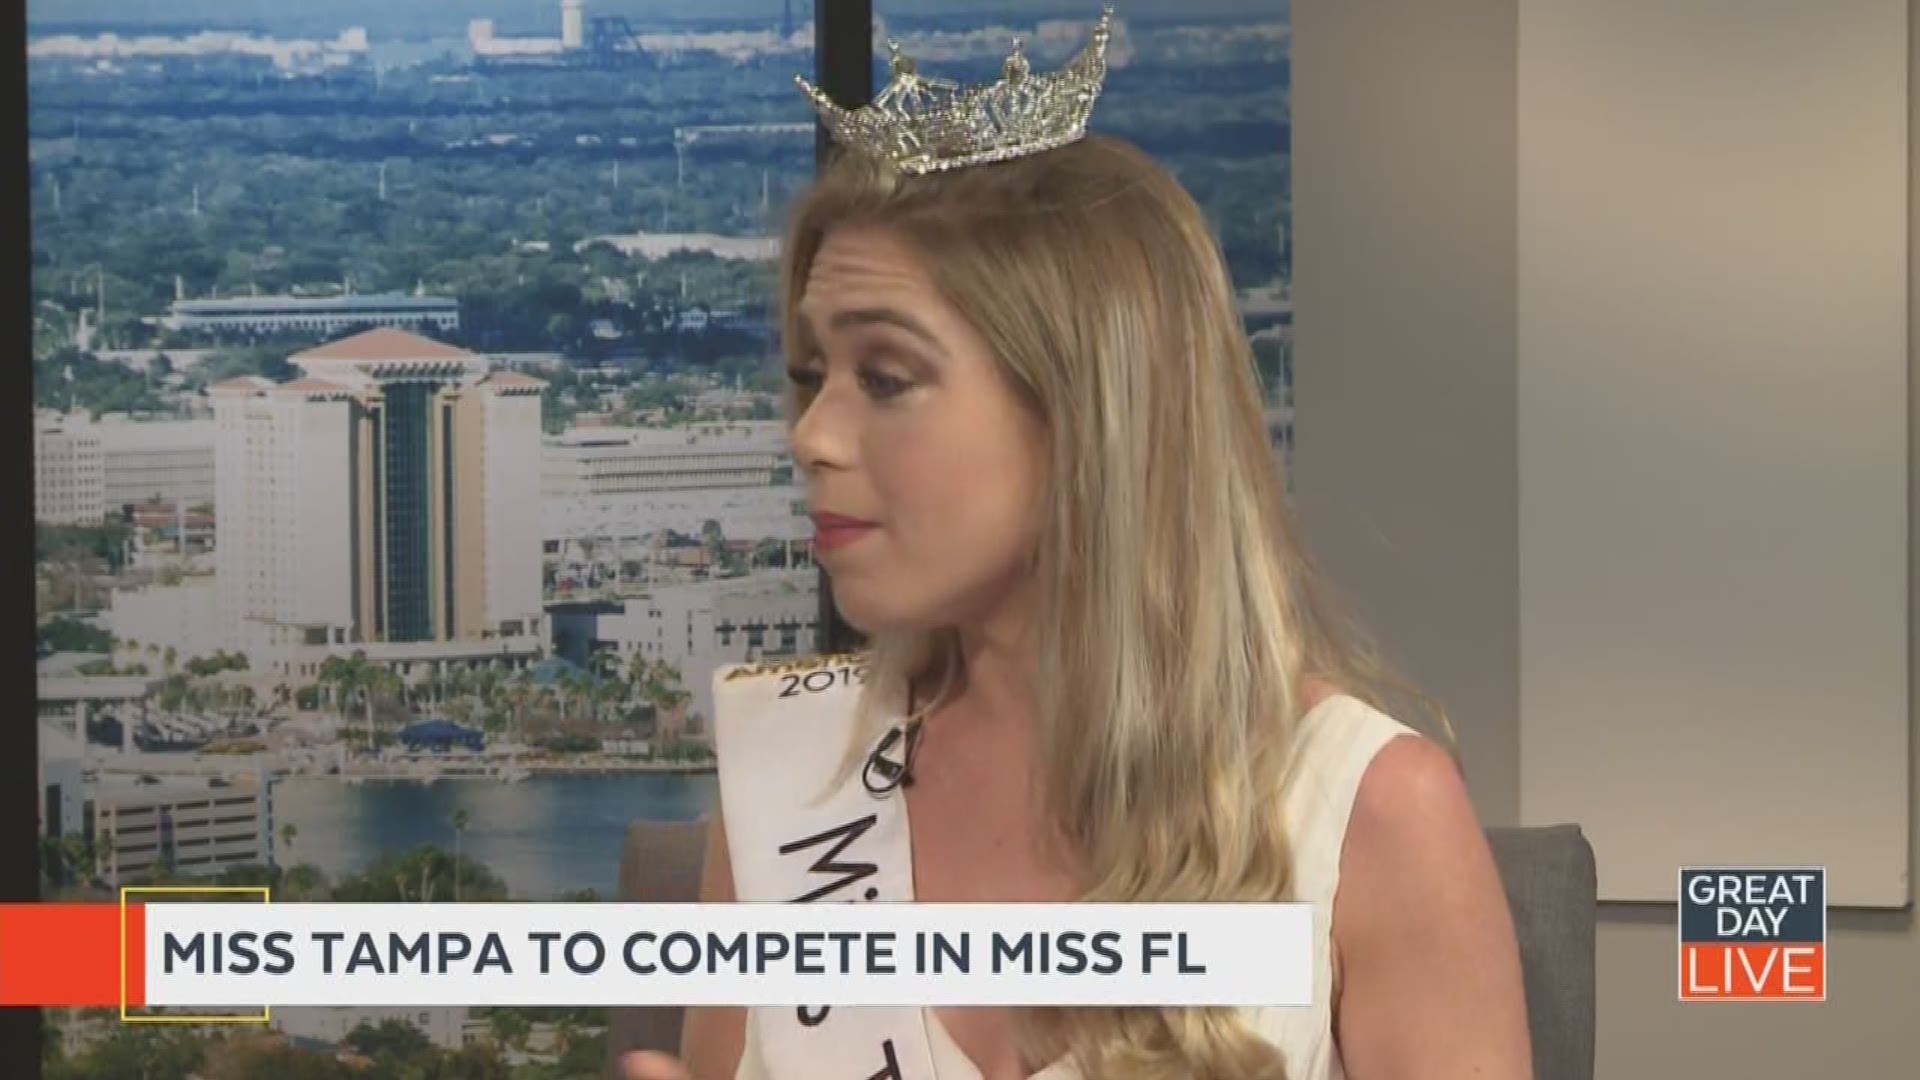 Lauren Nielsen was recently crowned Miss Tampa, and will soon compete for the title of Miss Florida. She joined GDL to talk about her experience and her passion for promoting positive body image after overcoming an eating disorder. The Miss Florida preliminaries being June 25 in Lakeland. You can read more about the scholarship program at missflorida.org.